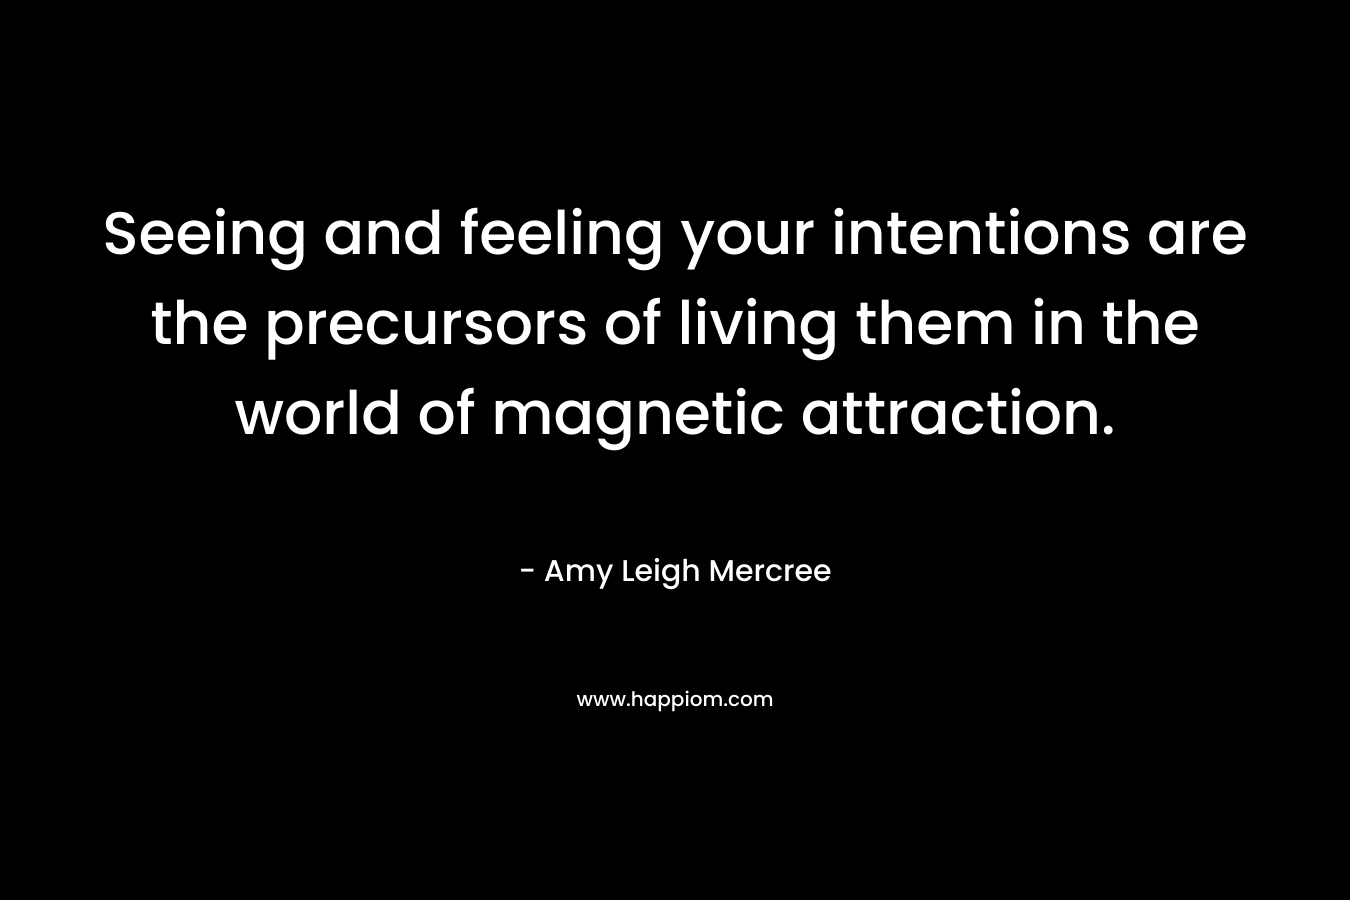 Seeing and feeling your intentions are the precursors of living them in the world of magnetic attraction. – Amy Leigh Mercree